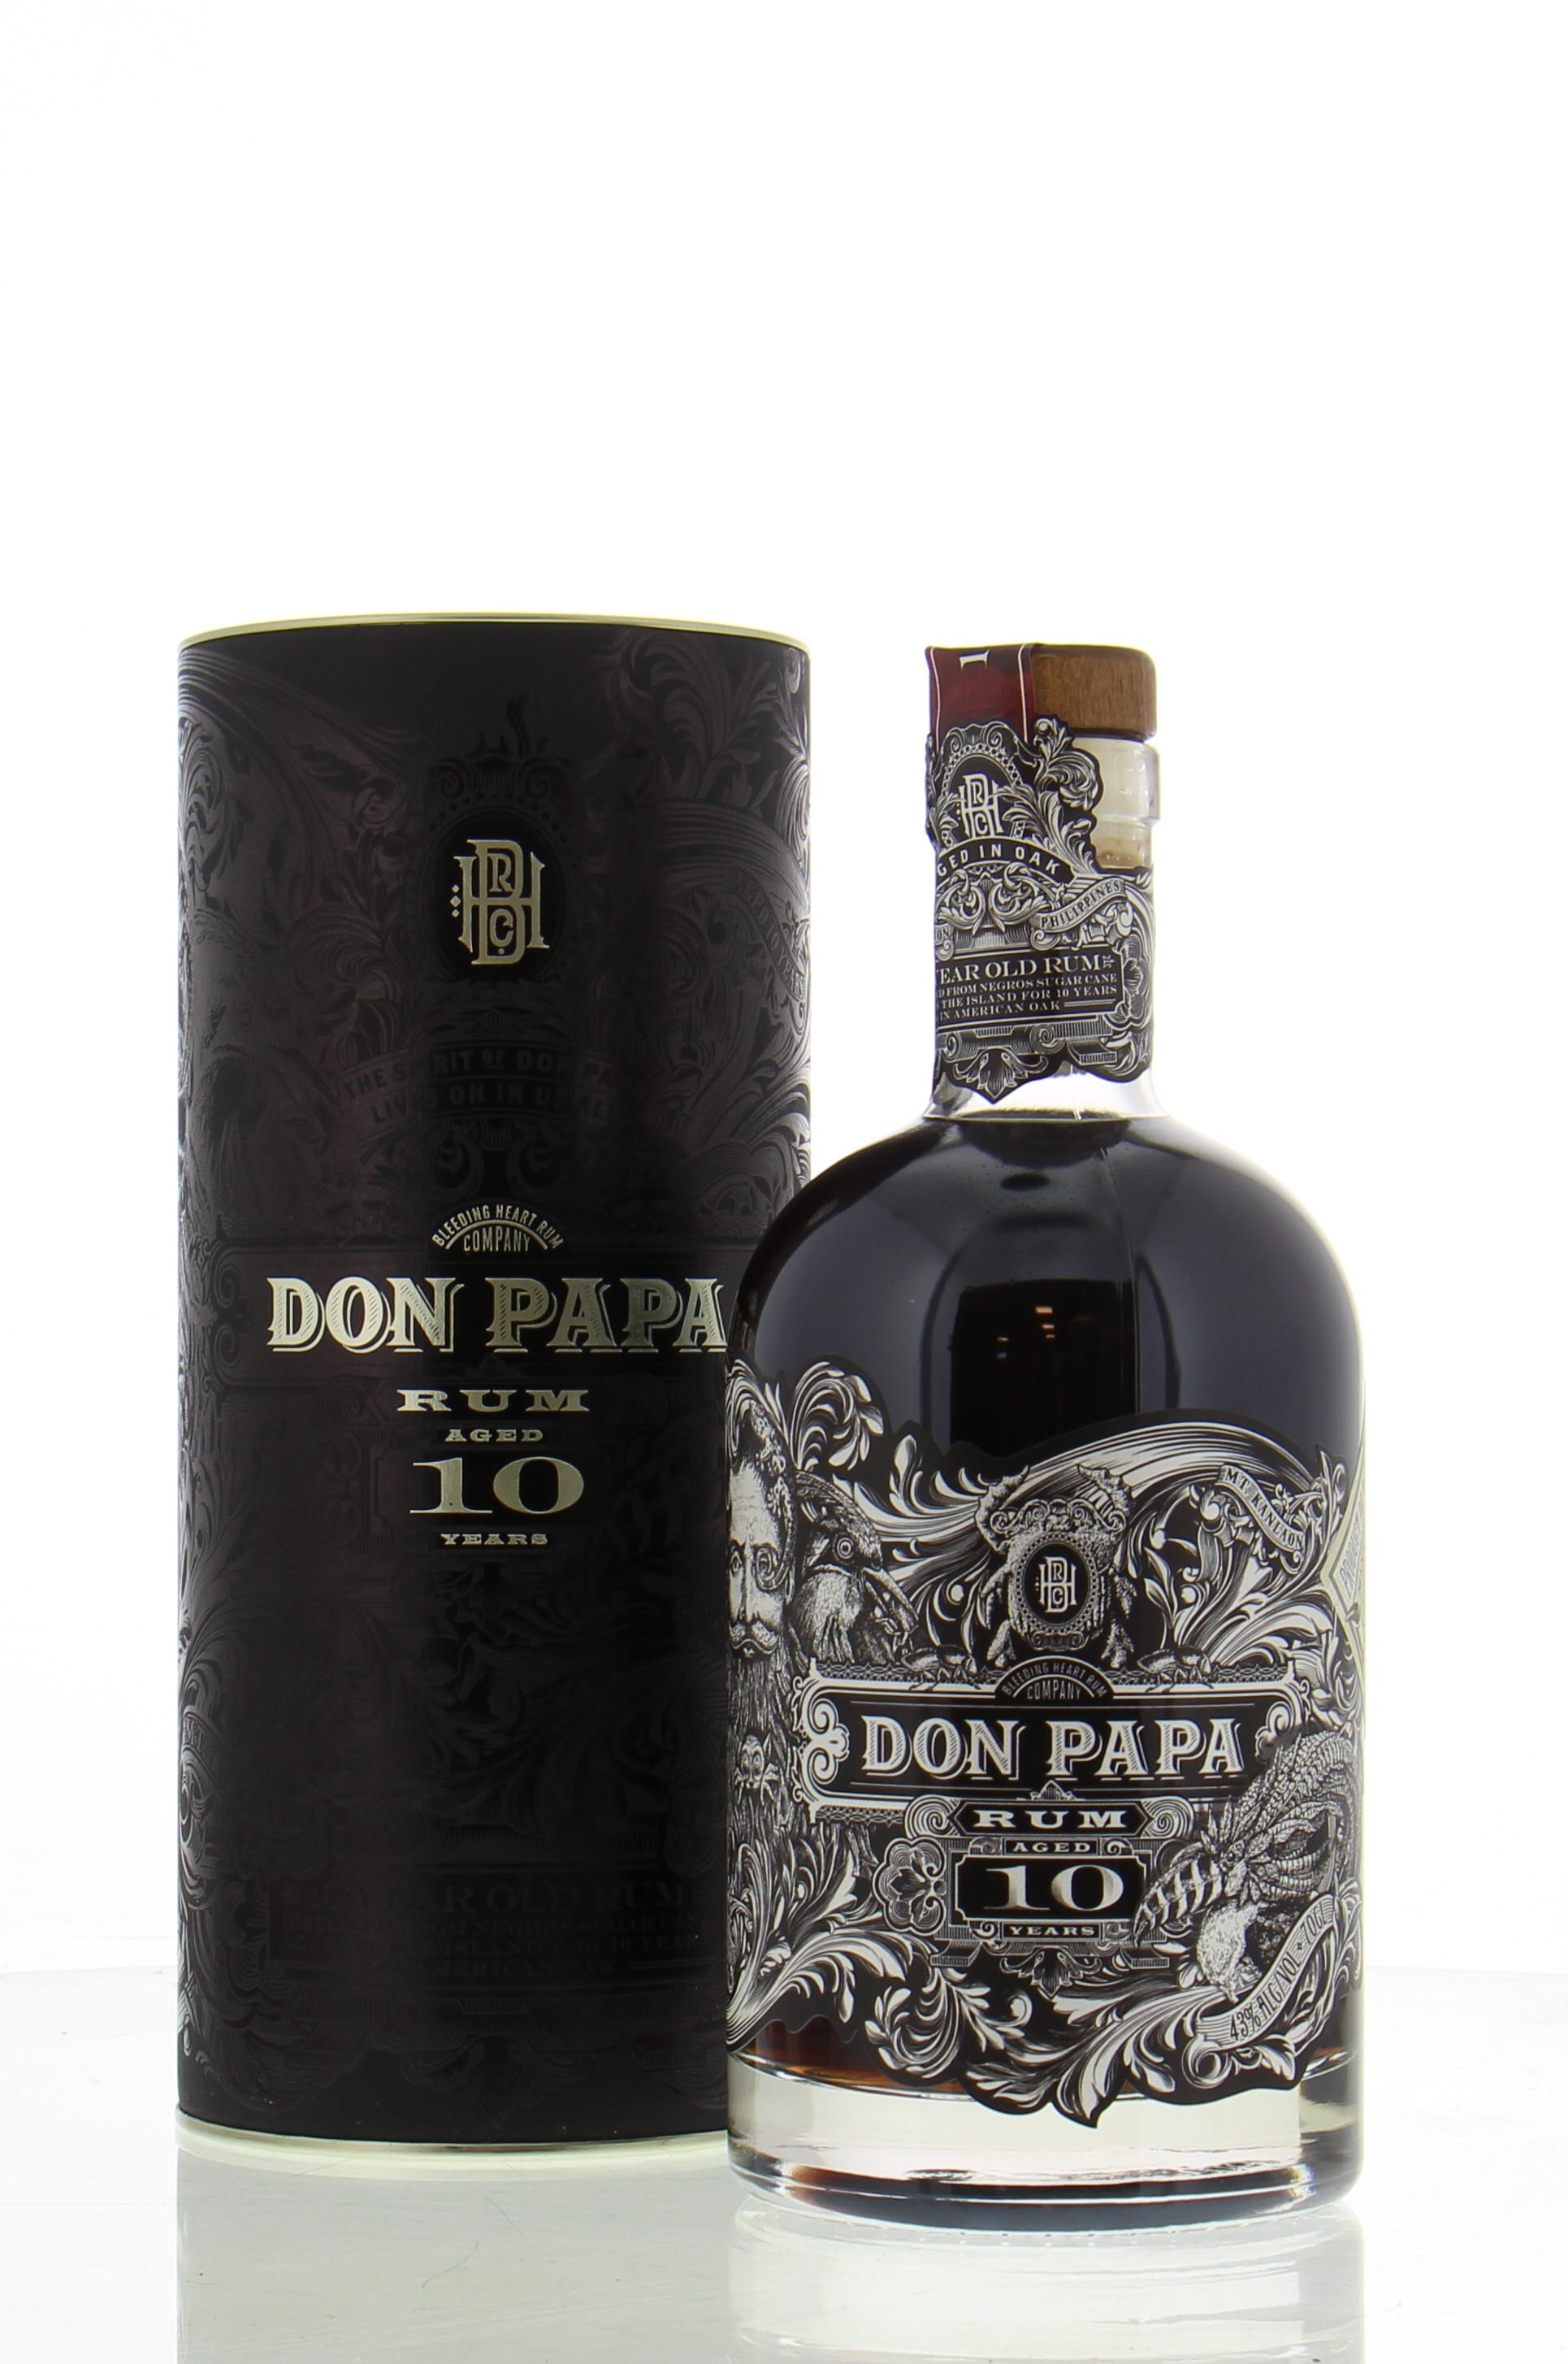 Don Papa 10 years 43% NV; | Buy Online | Best of Wines